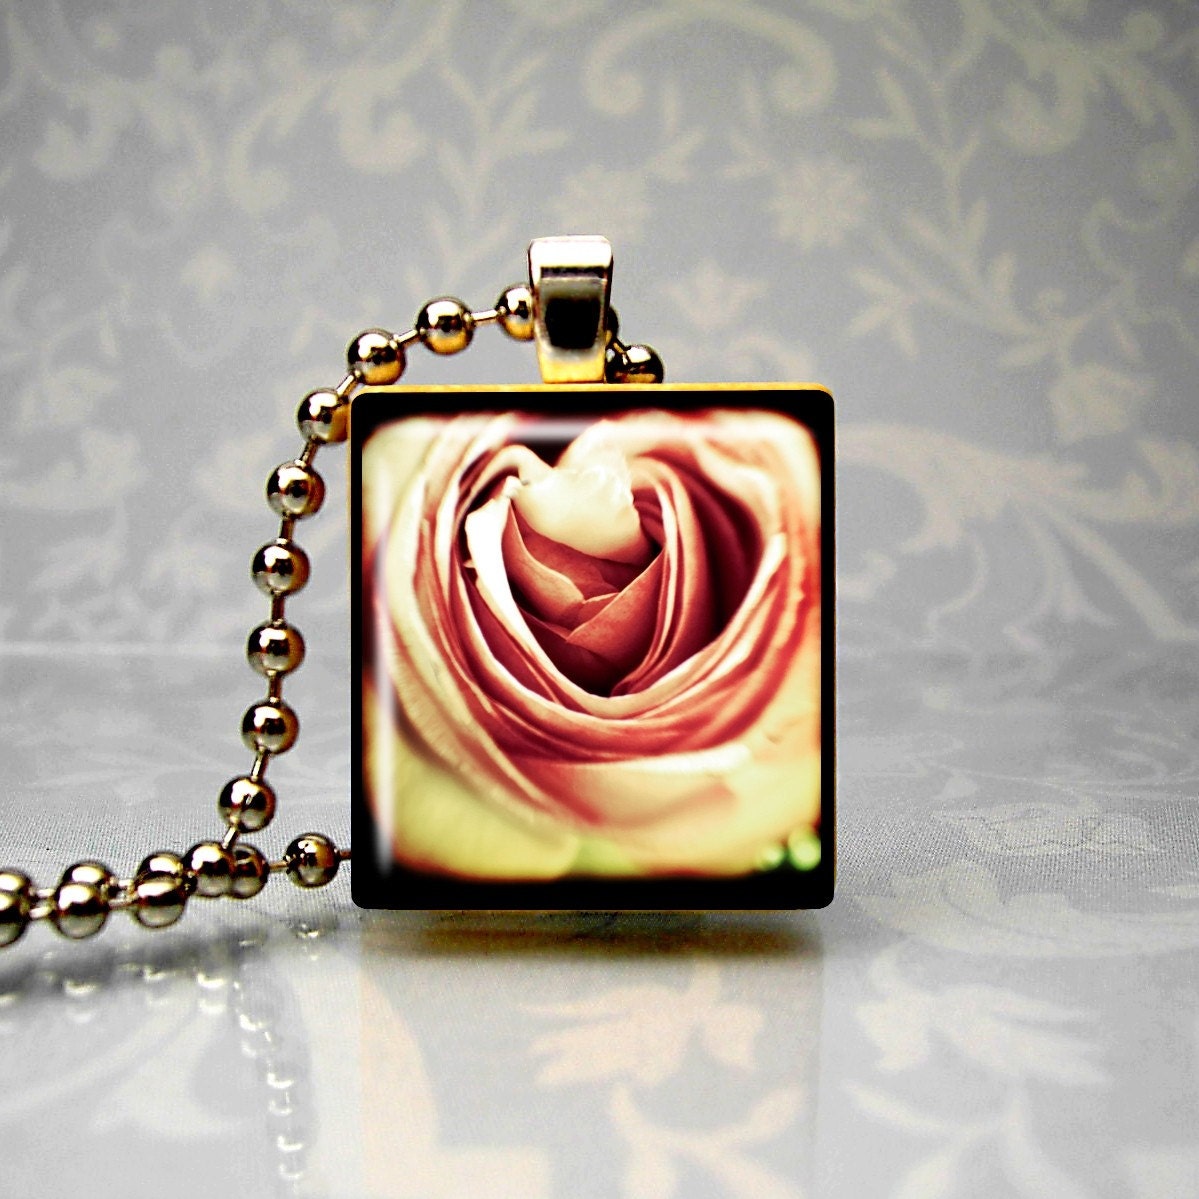 Pendant with the photo of a pink and yellow rose.